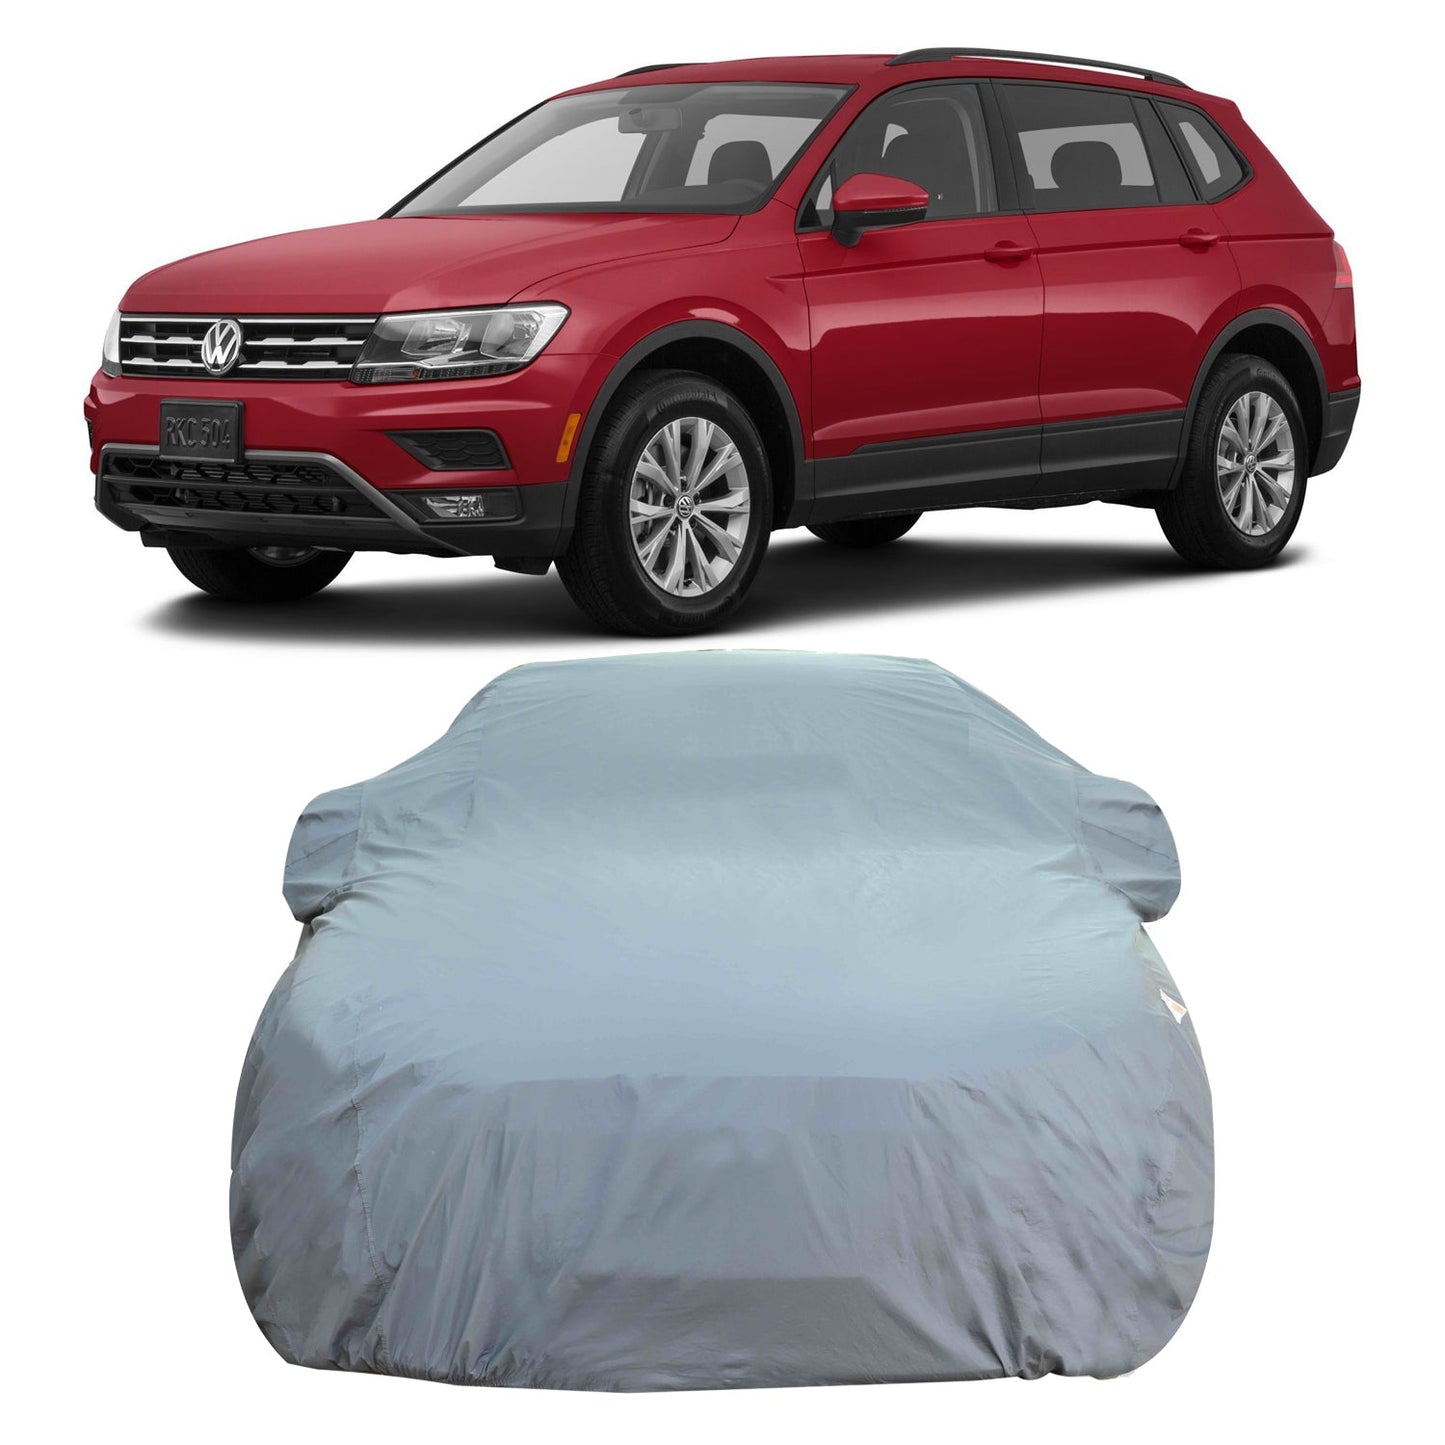 Oshotto Dark Grey 100% Anti Reflective, dustproof and Water Proof Car Body Cover with Mirror Pockets For Volkswagen Tiguan